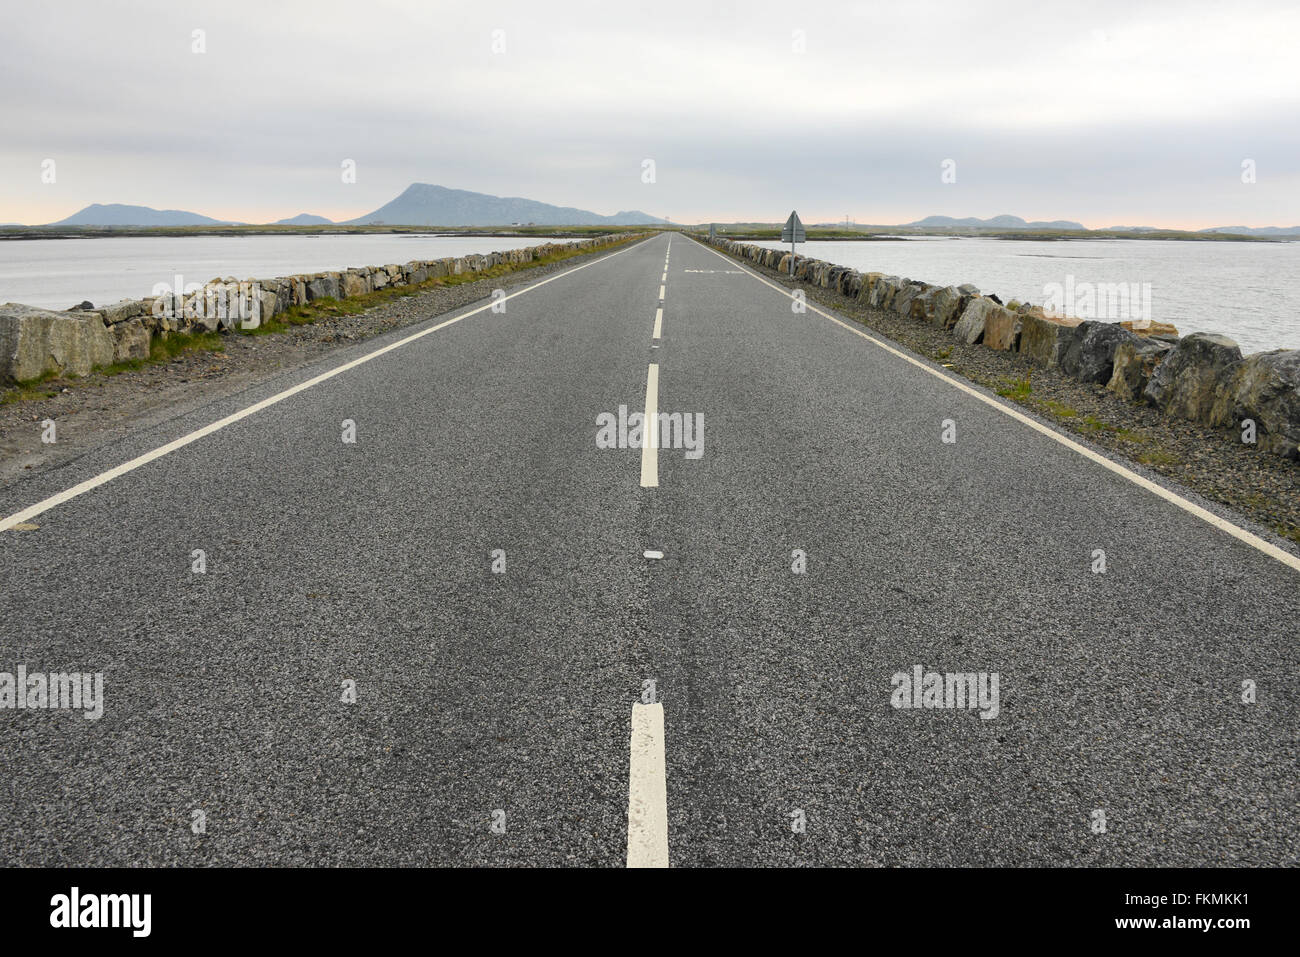 Looking North East along the causeway between Benbecula and Grimsay, North Uist, Outer Hebrides, Scotland Stock Photo